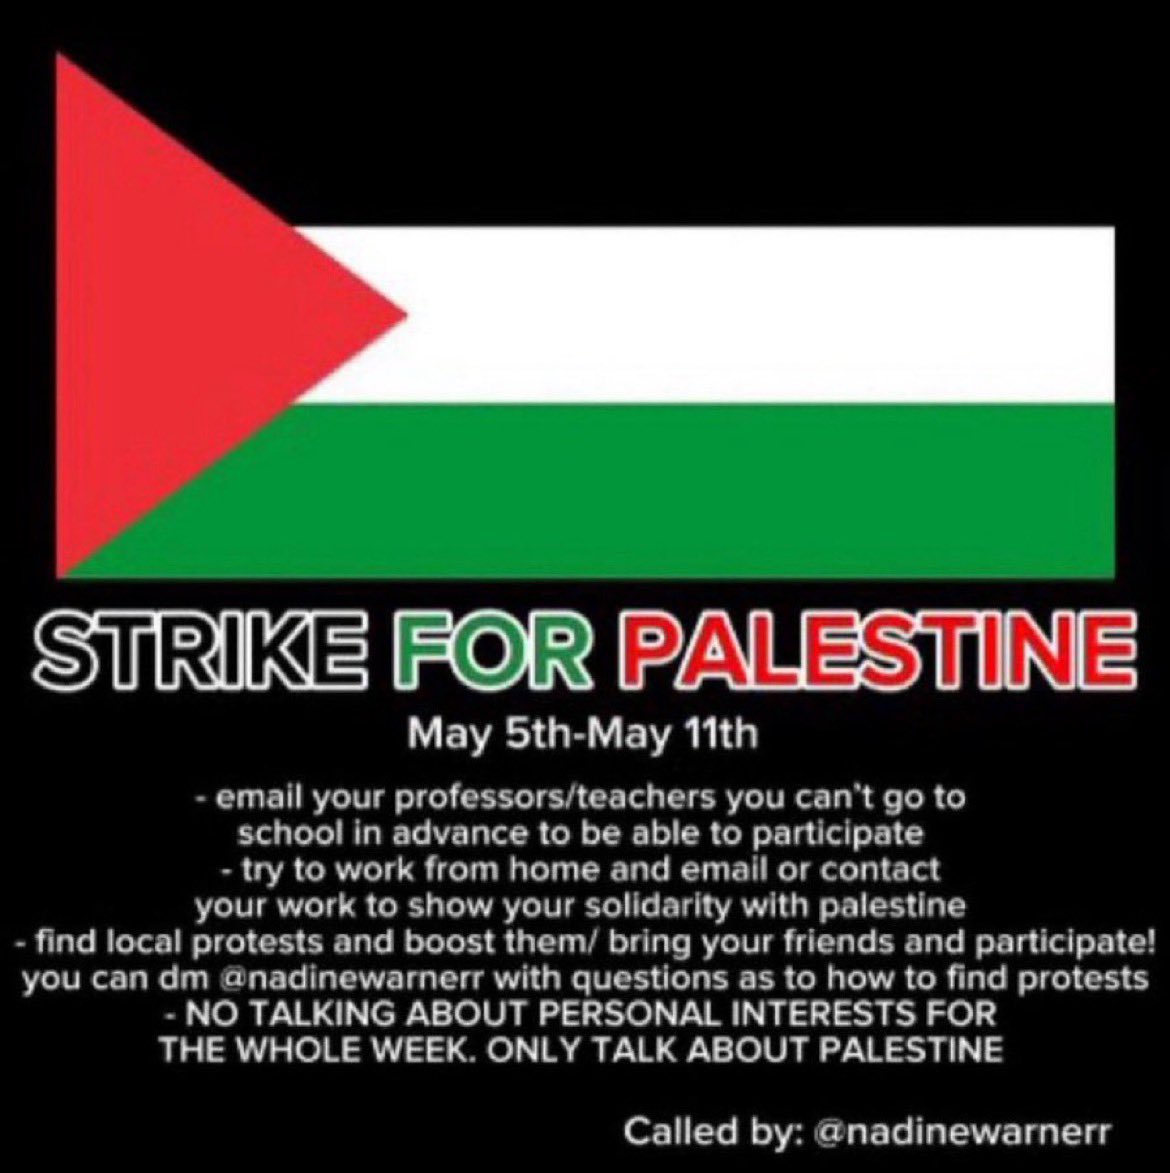 good morning everyone. please dont forget that we are still on a strike and it is important to keep talking about palestine. block all celebrities operation has started and all of a sudden all the celebrities are shaken to their core and speaking up. do not forget that we are the